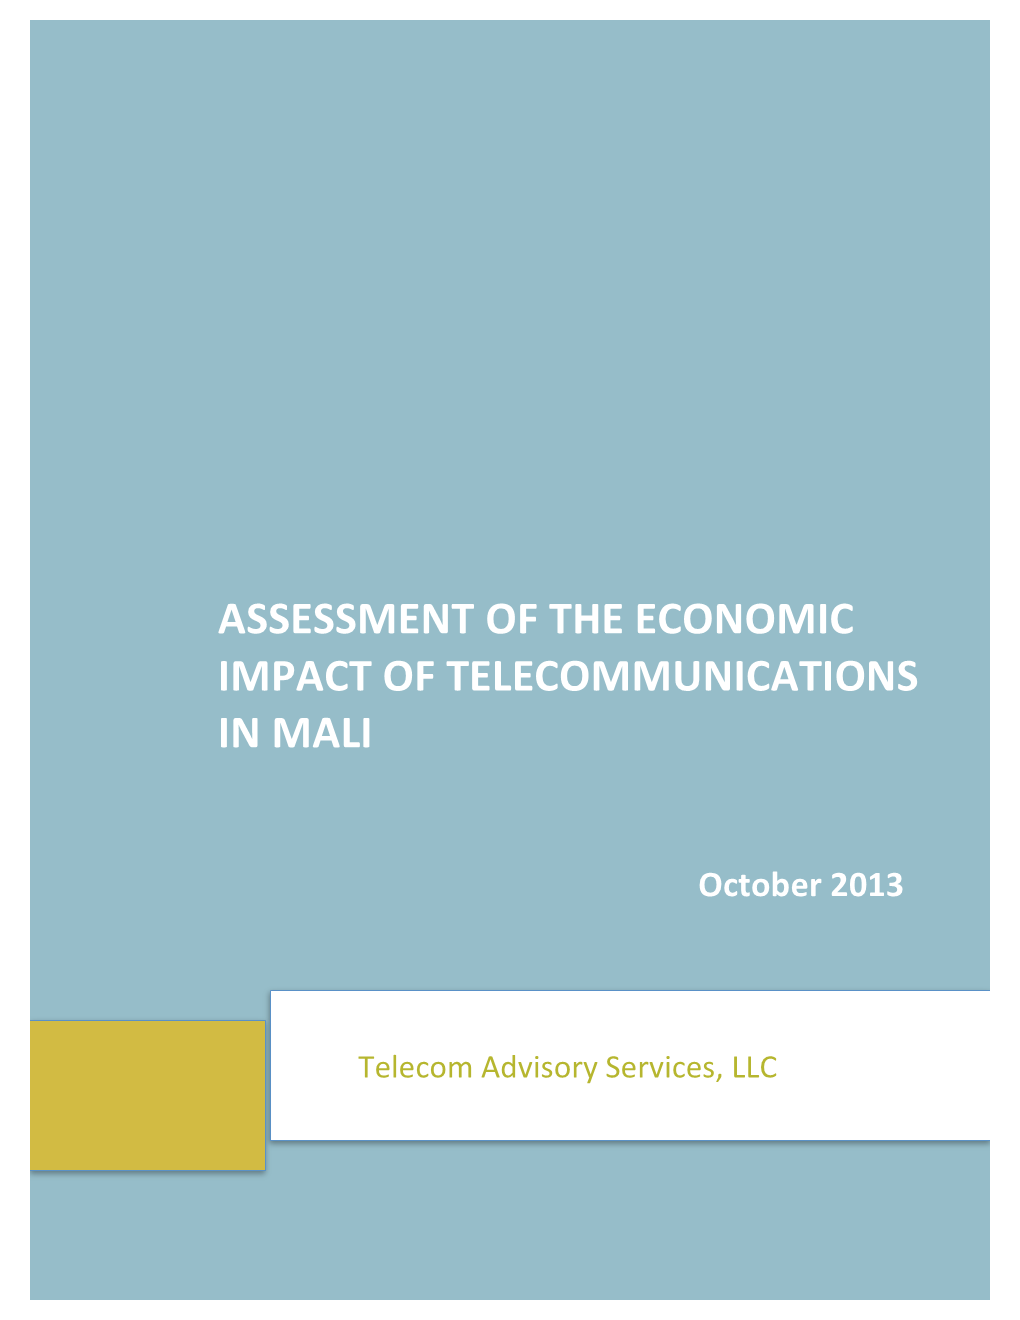 The Economic Impact of Communications in Mali